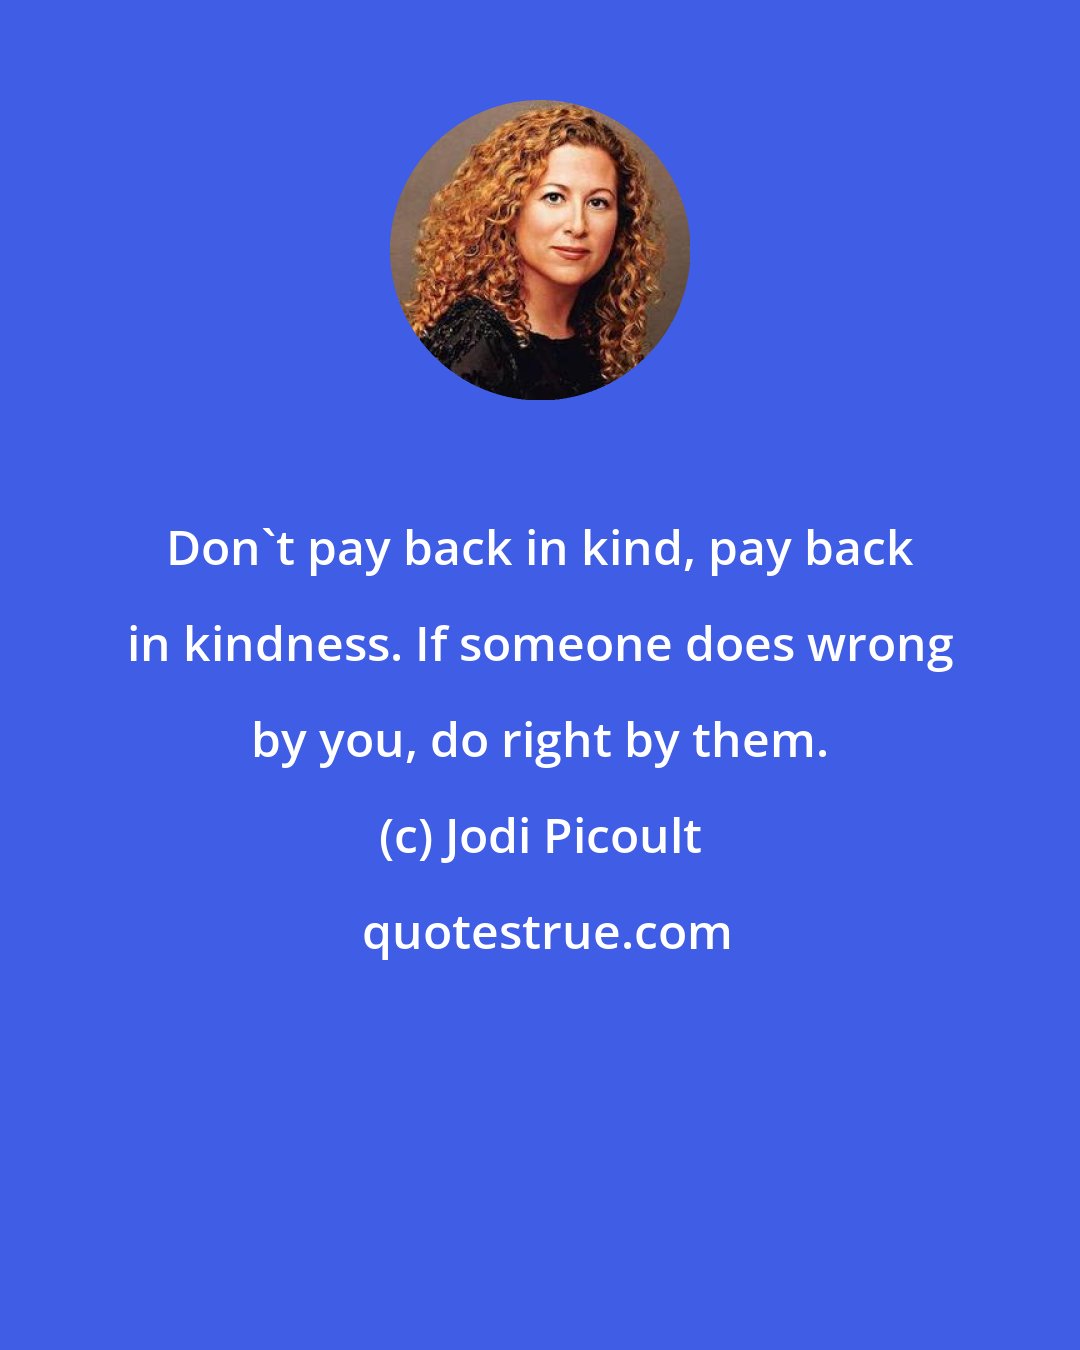 Jodi Picoult: Don't pay back in kind, pay back in kindness. If someone does wrong by you, do right by them.